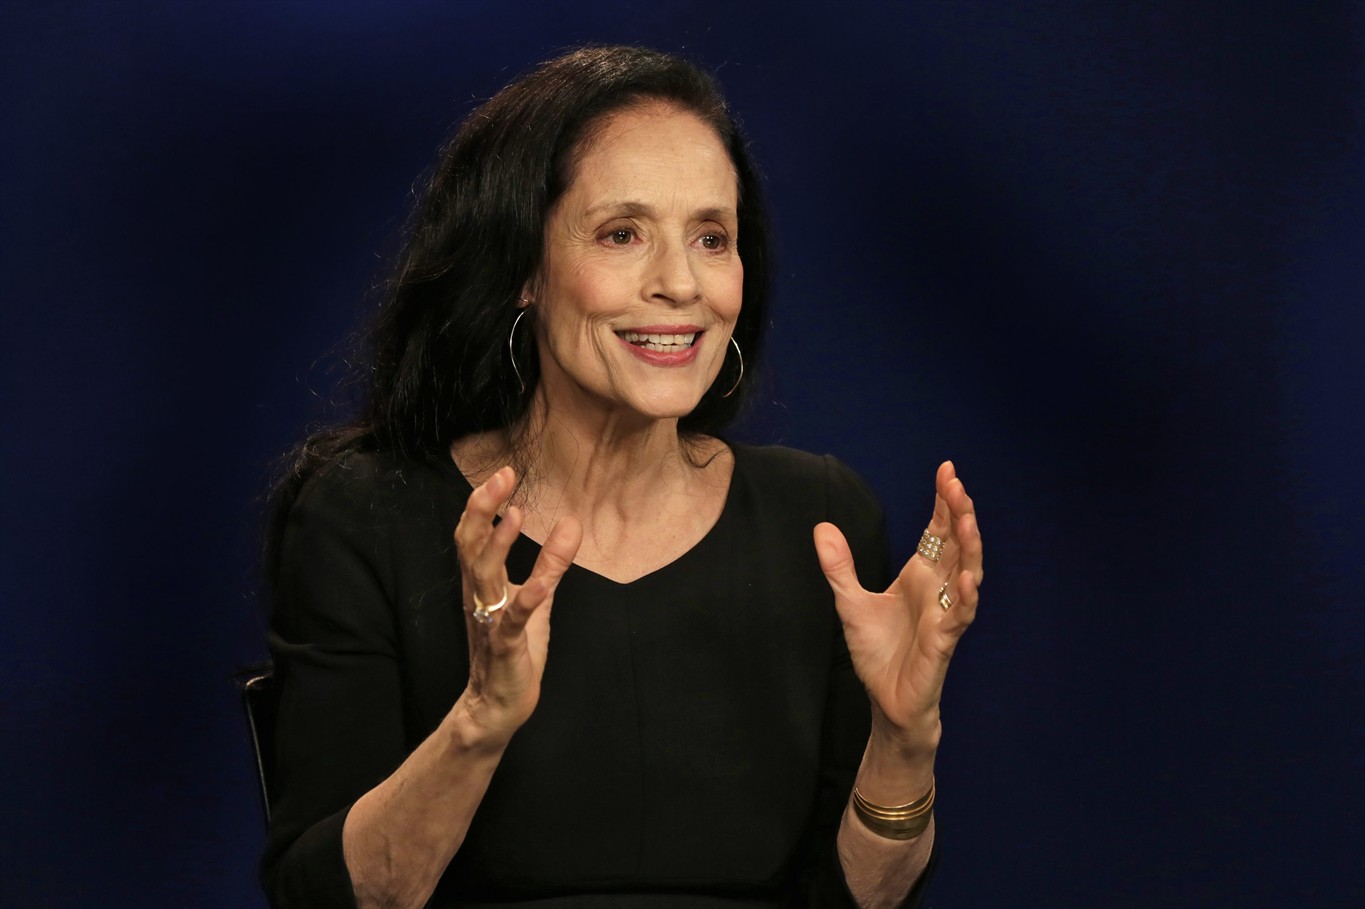 Q&A: Sonia Braga plays the role of her life at 66 - NEWS 11301365 x 909